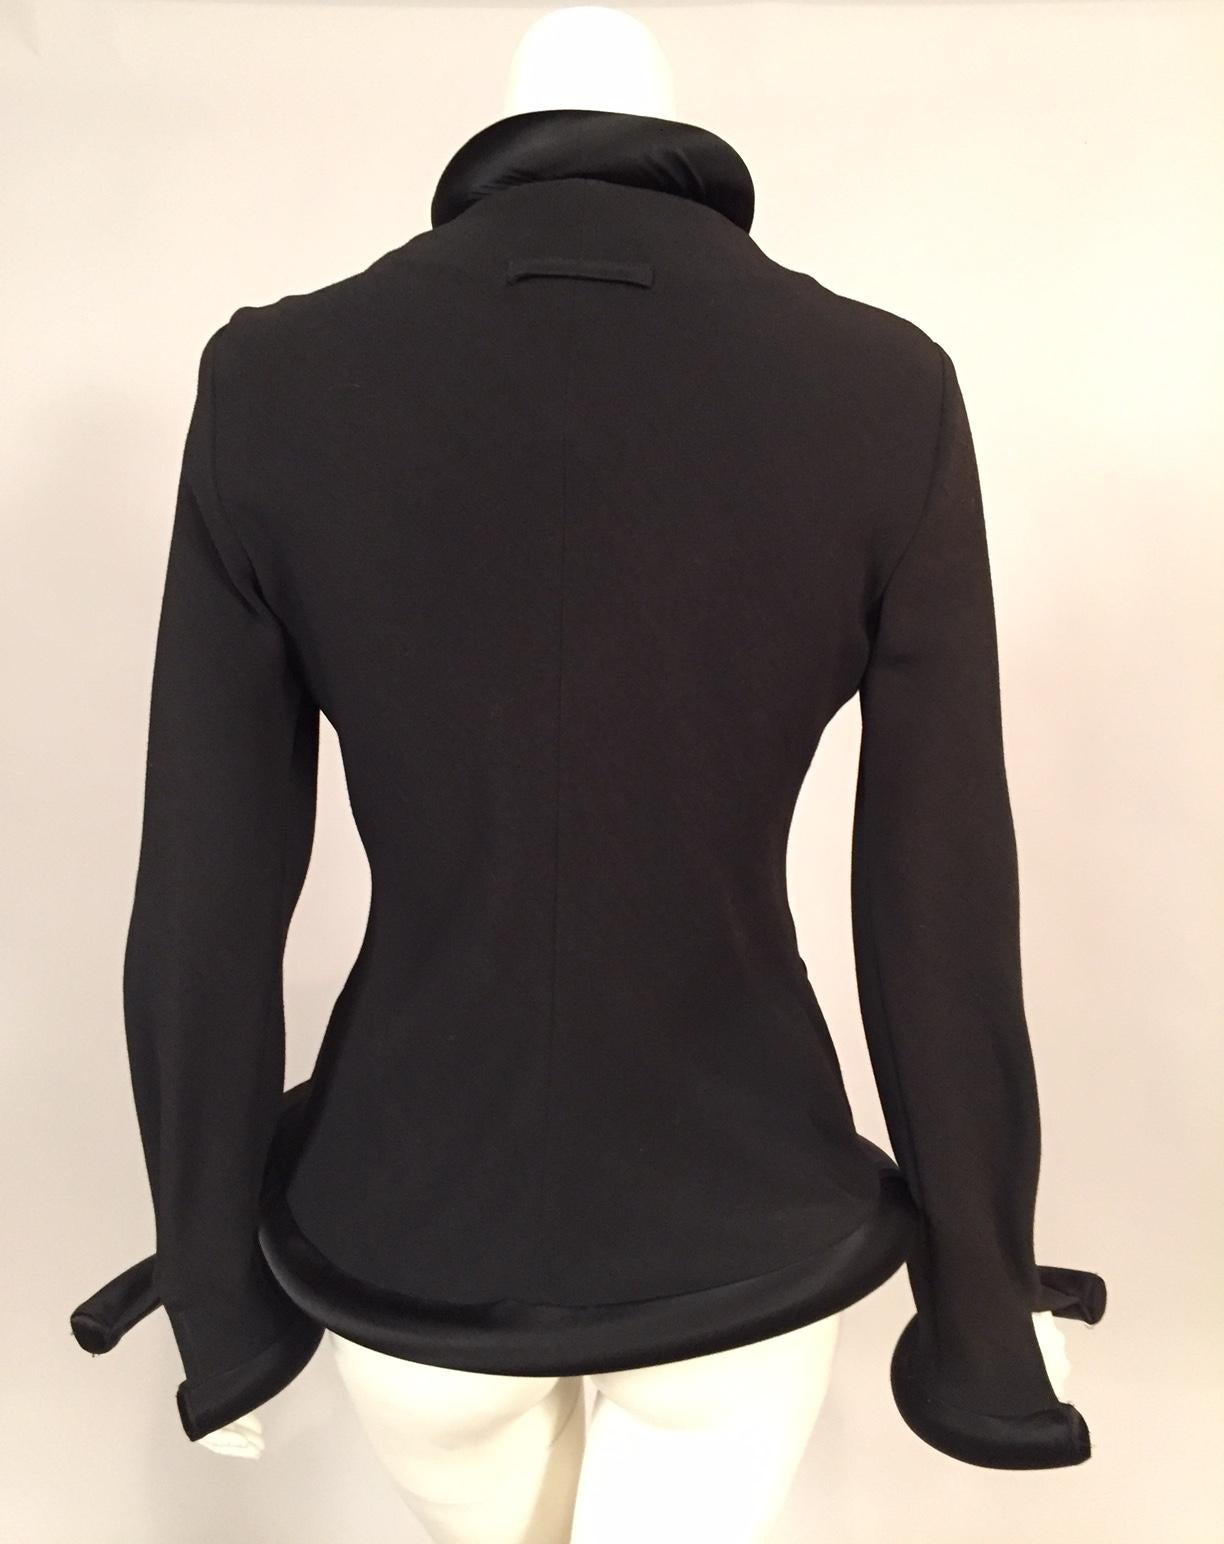 Women's or Men's Jean Paul Gaultier Black Jacket with Padded Satin Collar, Cuffs and Hemline